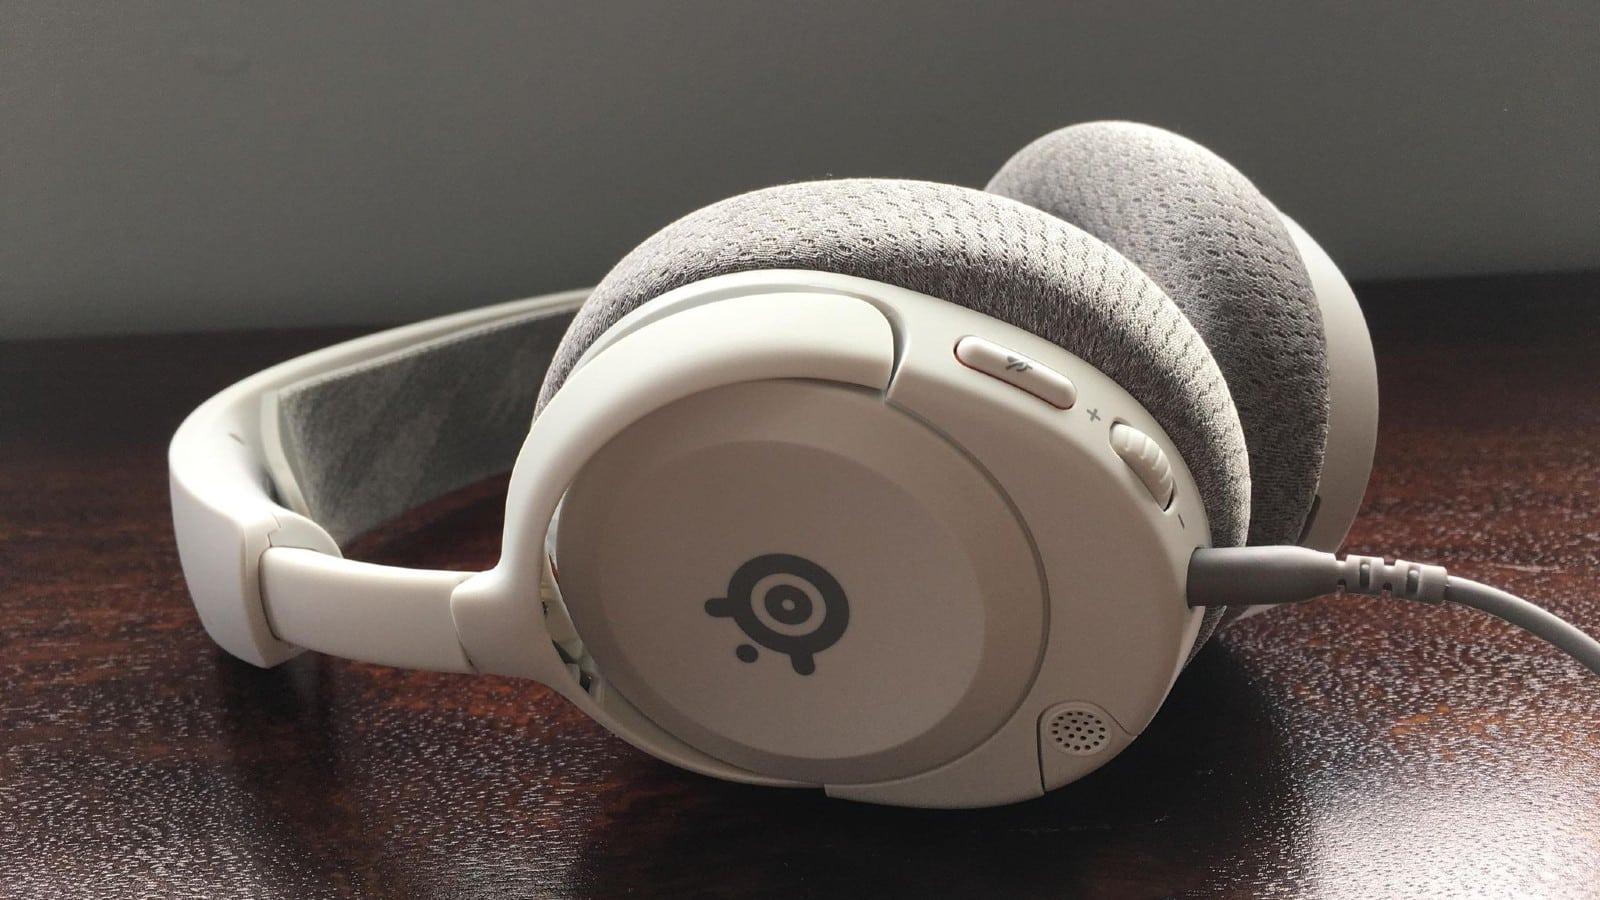 SteelSeries Arctis Nova 1 review: Quality at an affordable price